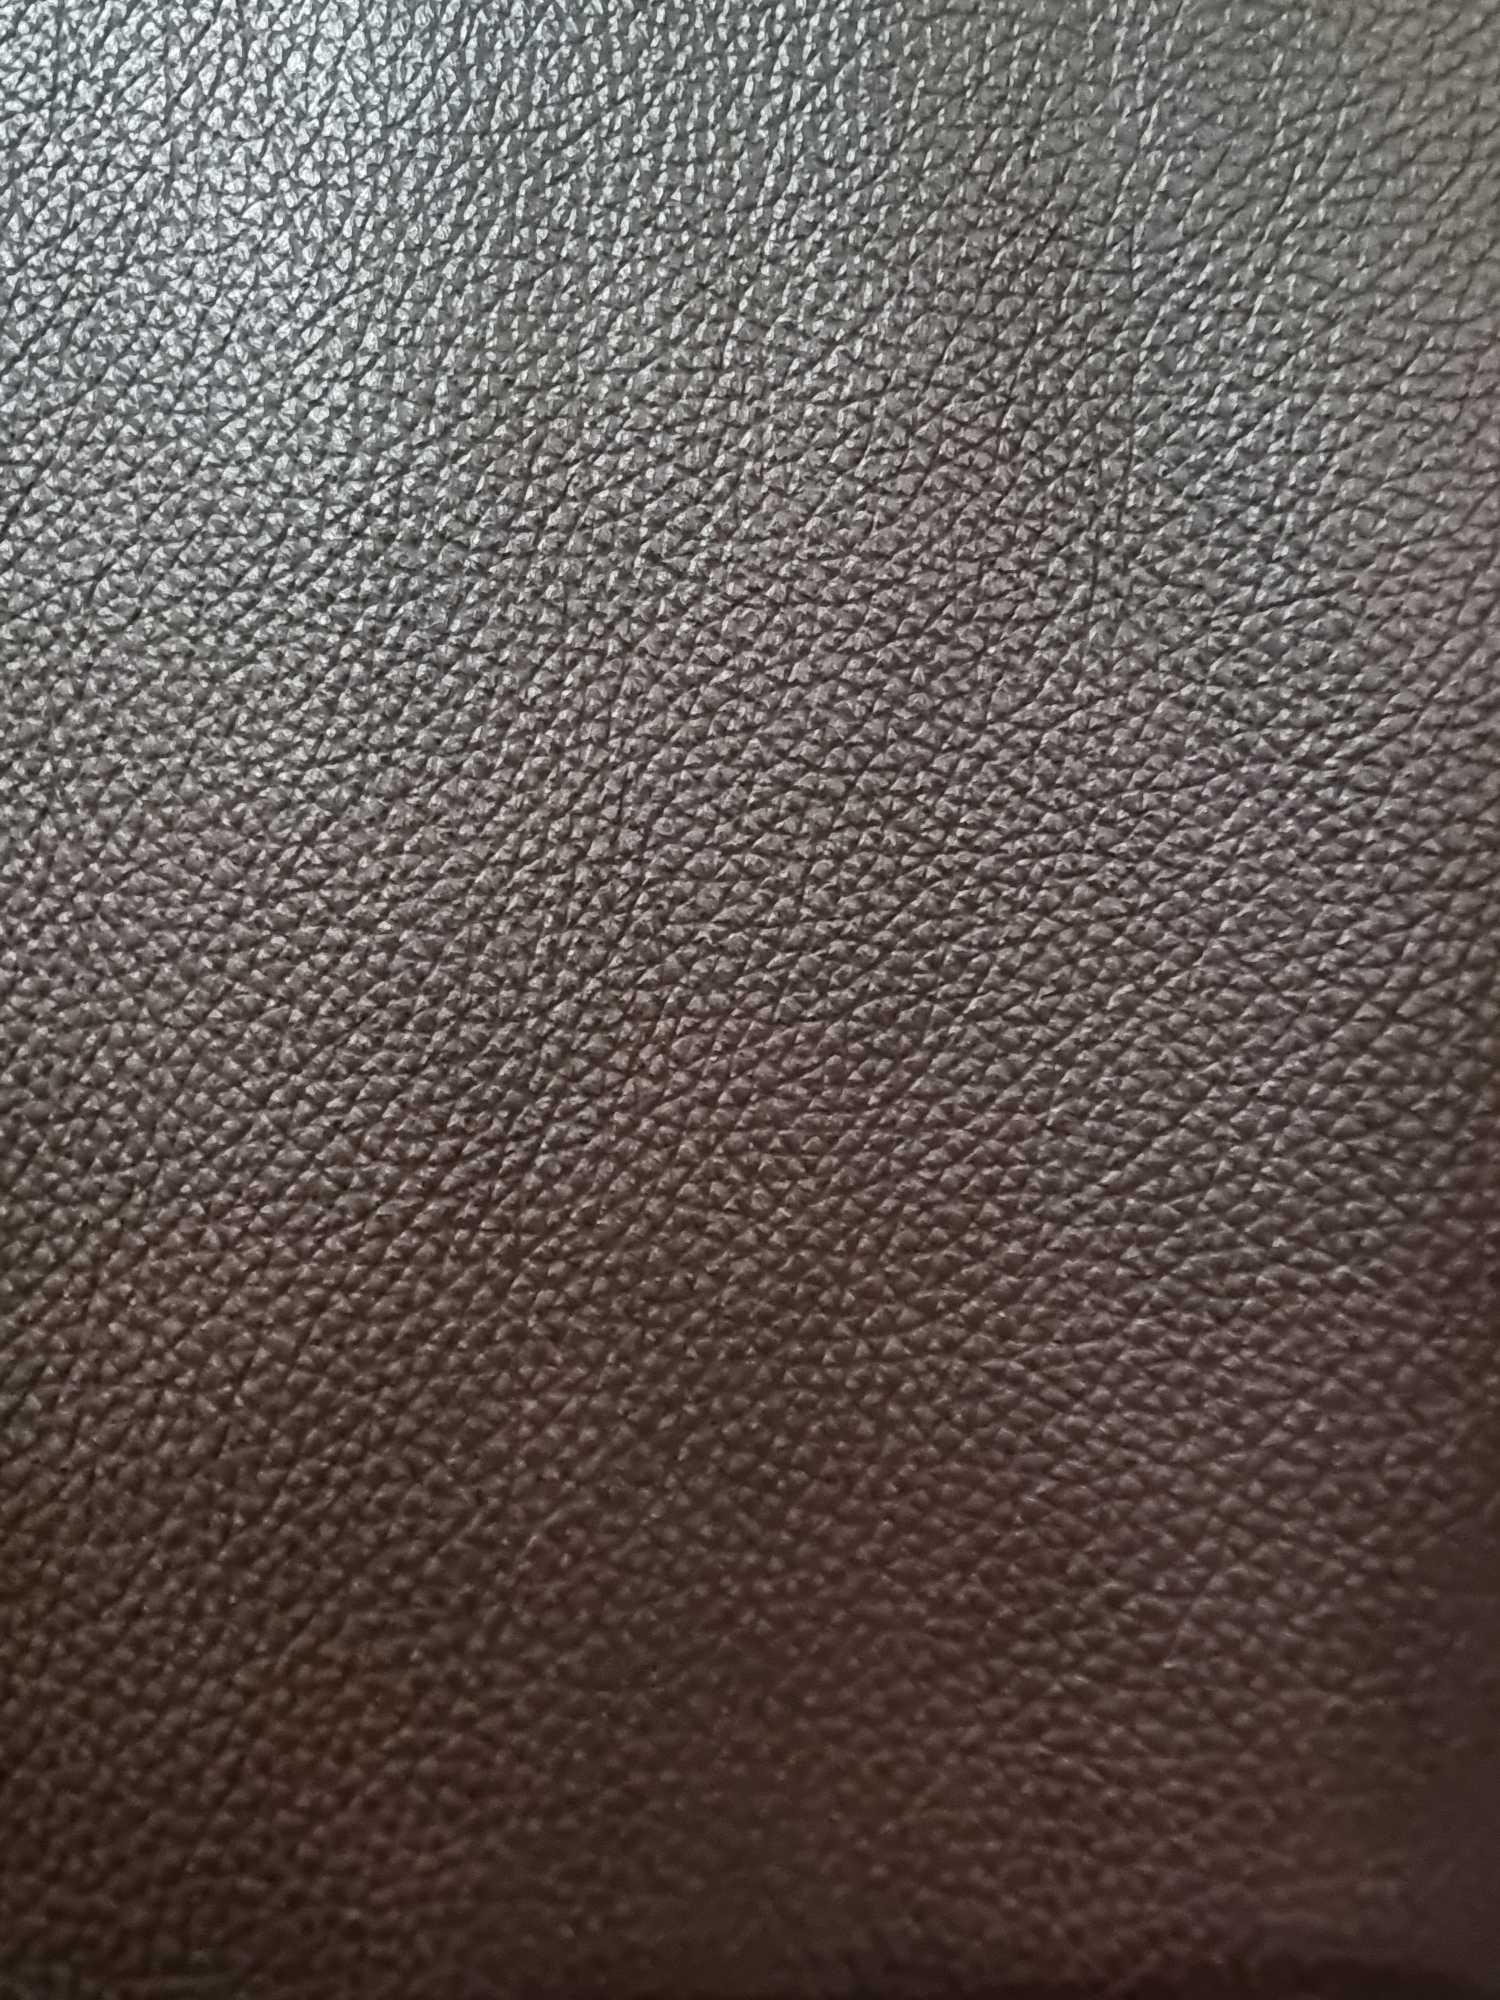 Mastrotto Hudson Chocolate Leather Hide approximately 3 51M2 1 95 x 1 8cm ( Hide No,261) - Image 2 of 2